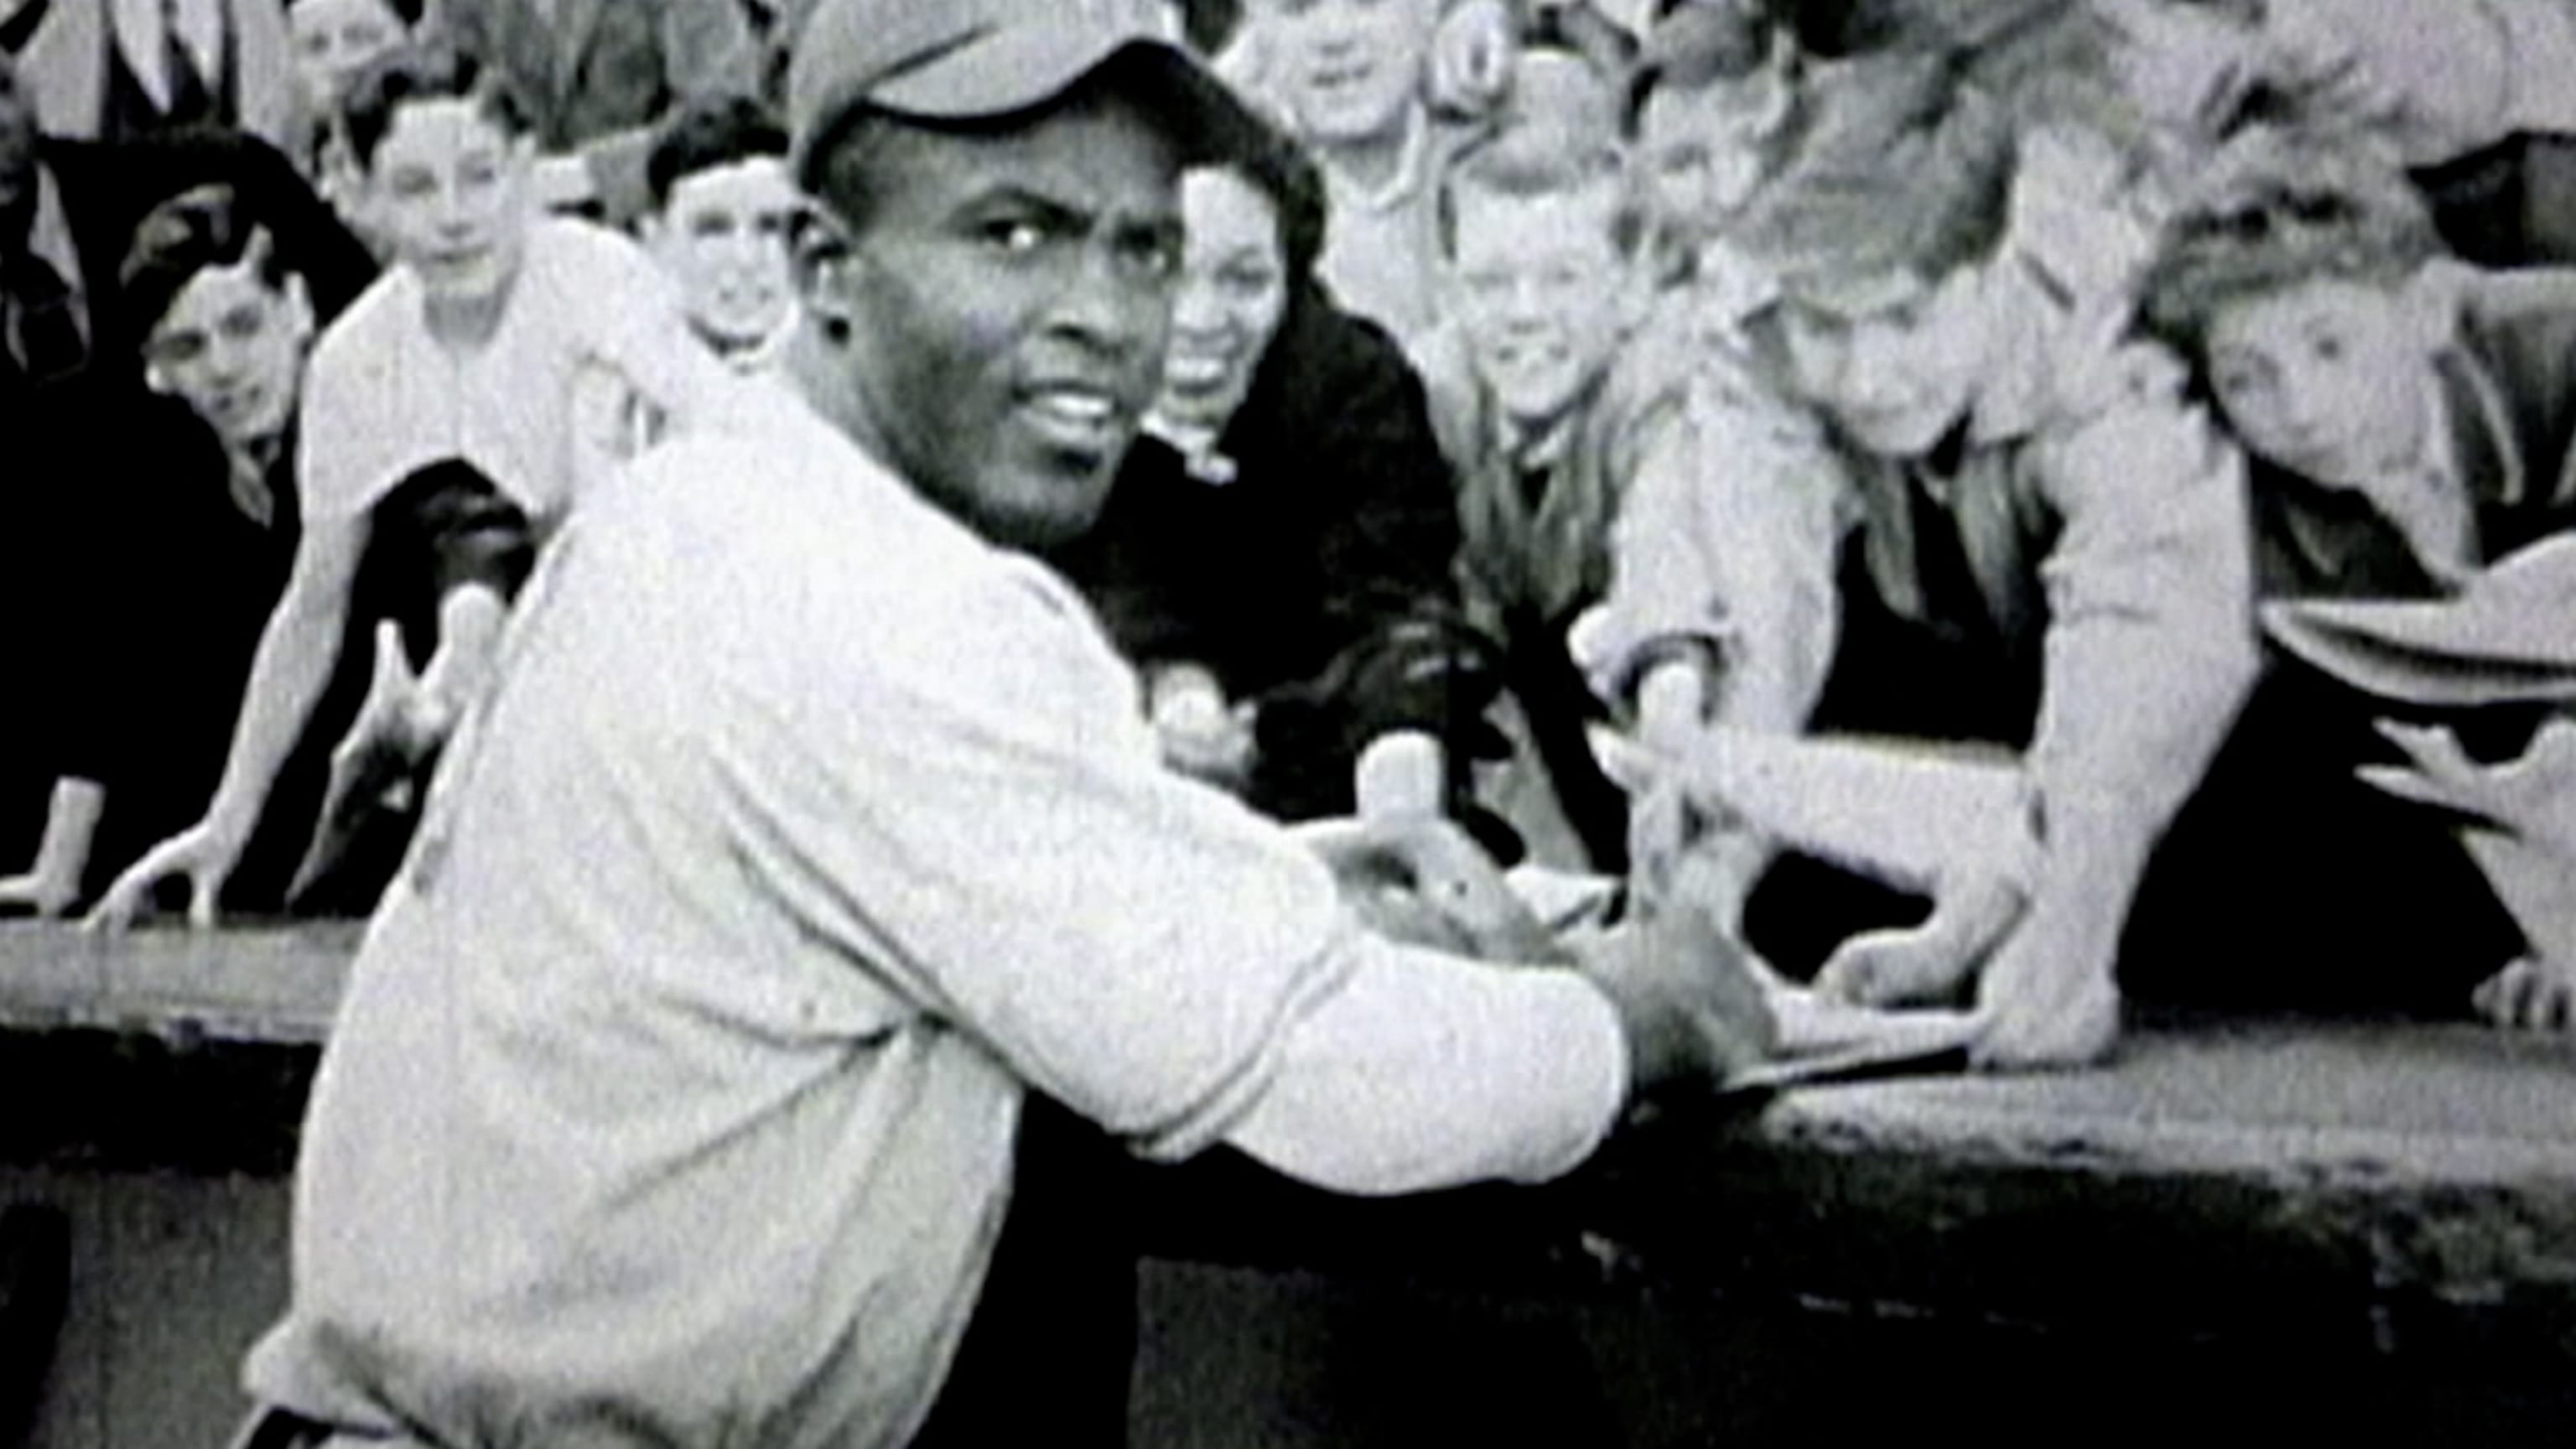 Reflections on Jackie Robinson Day